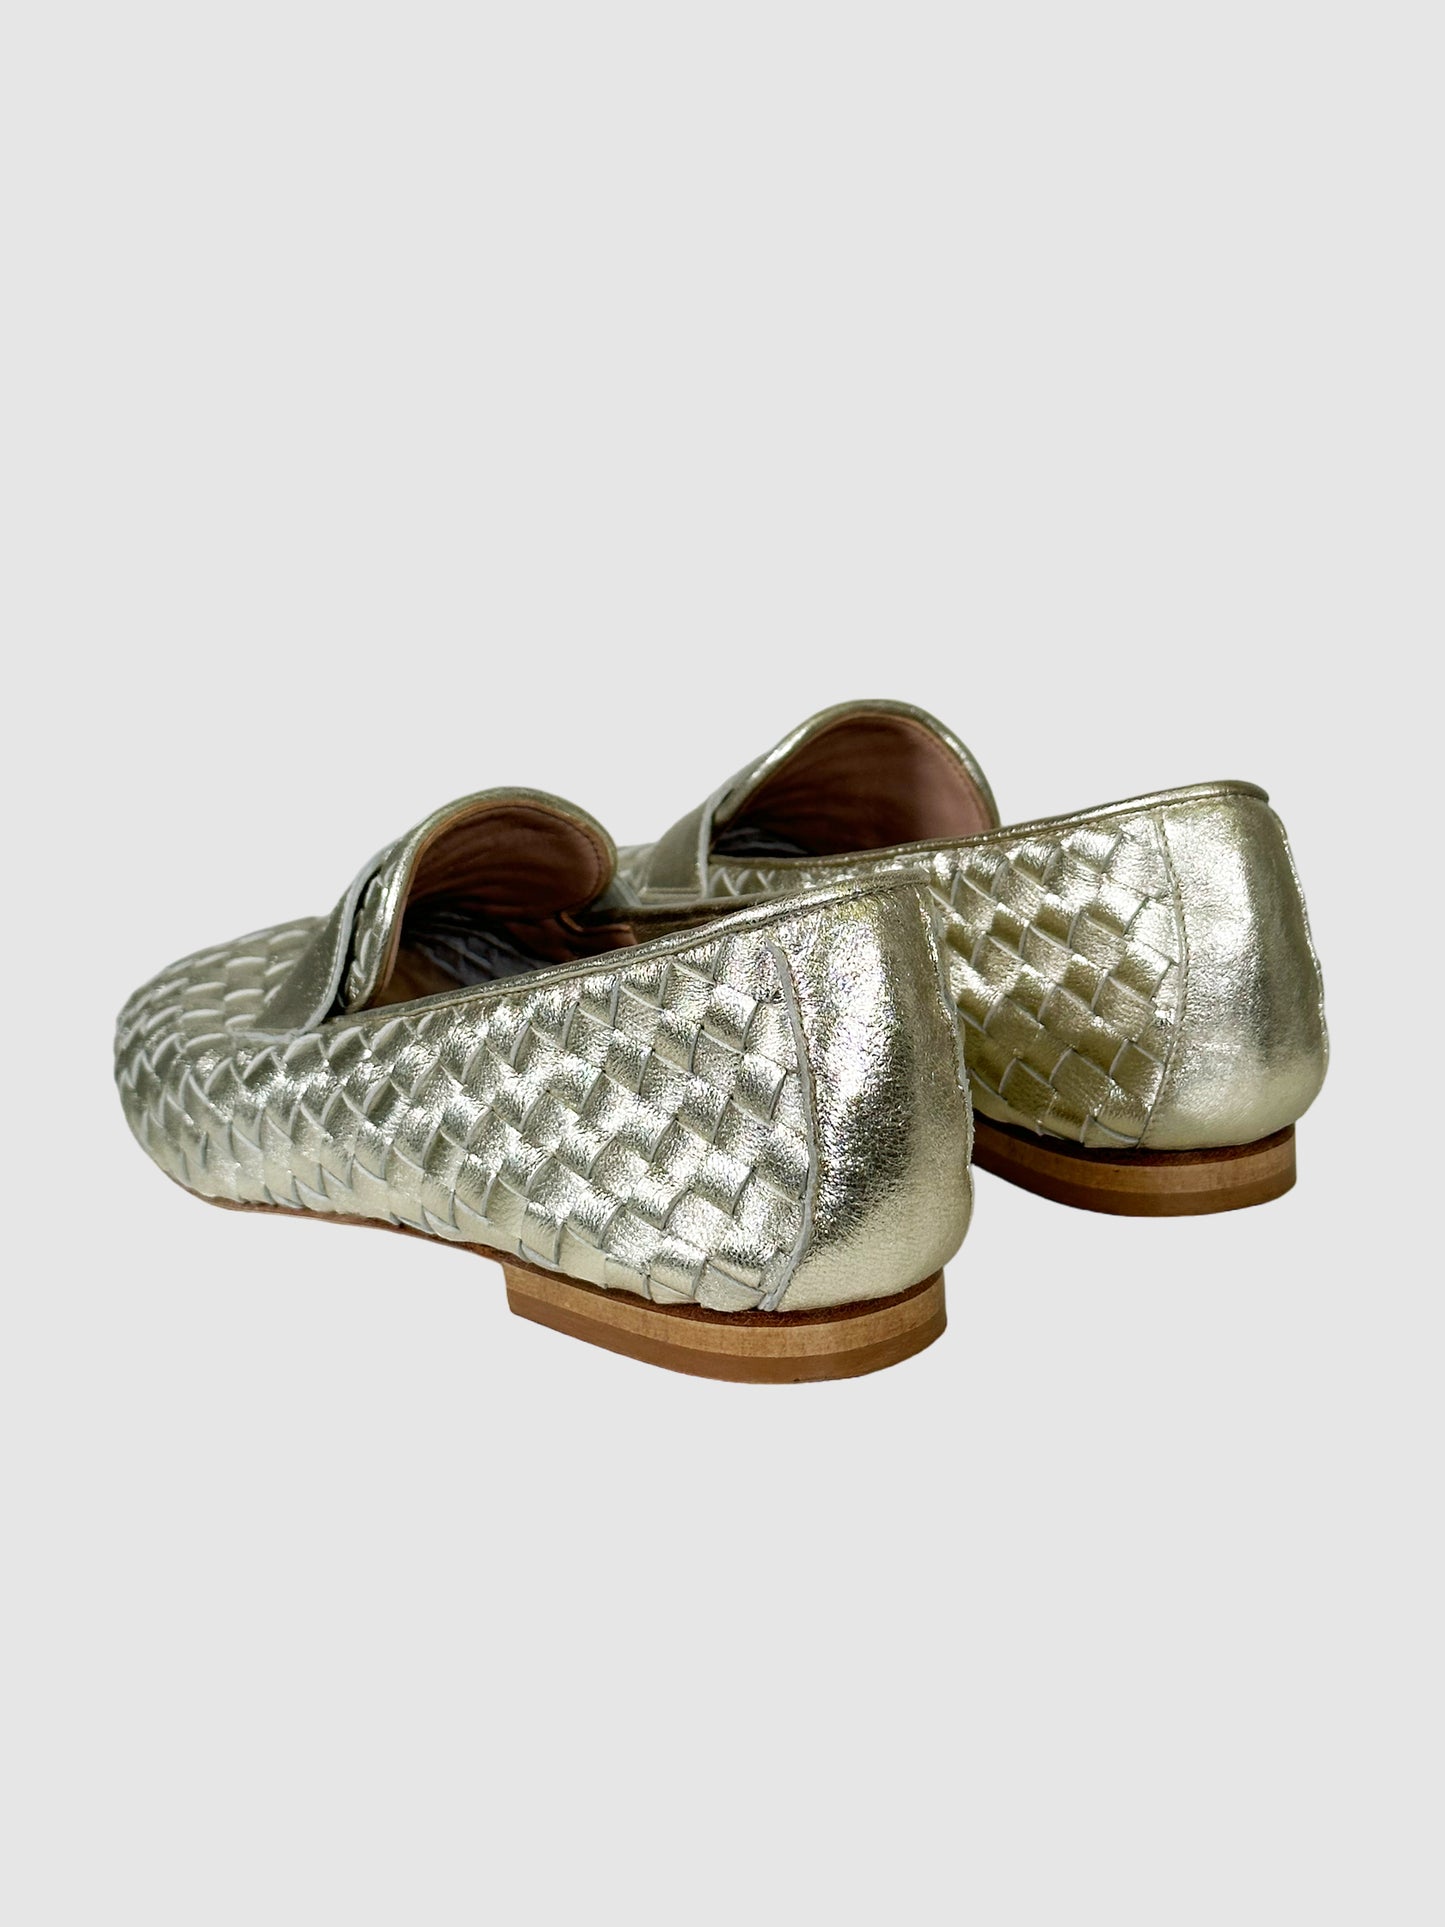 Woven Leather Loafers - Size 39.5